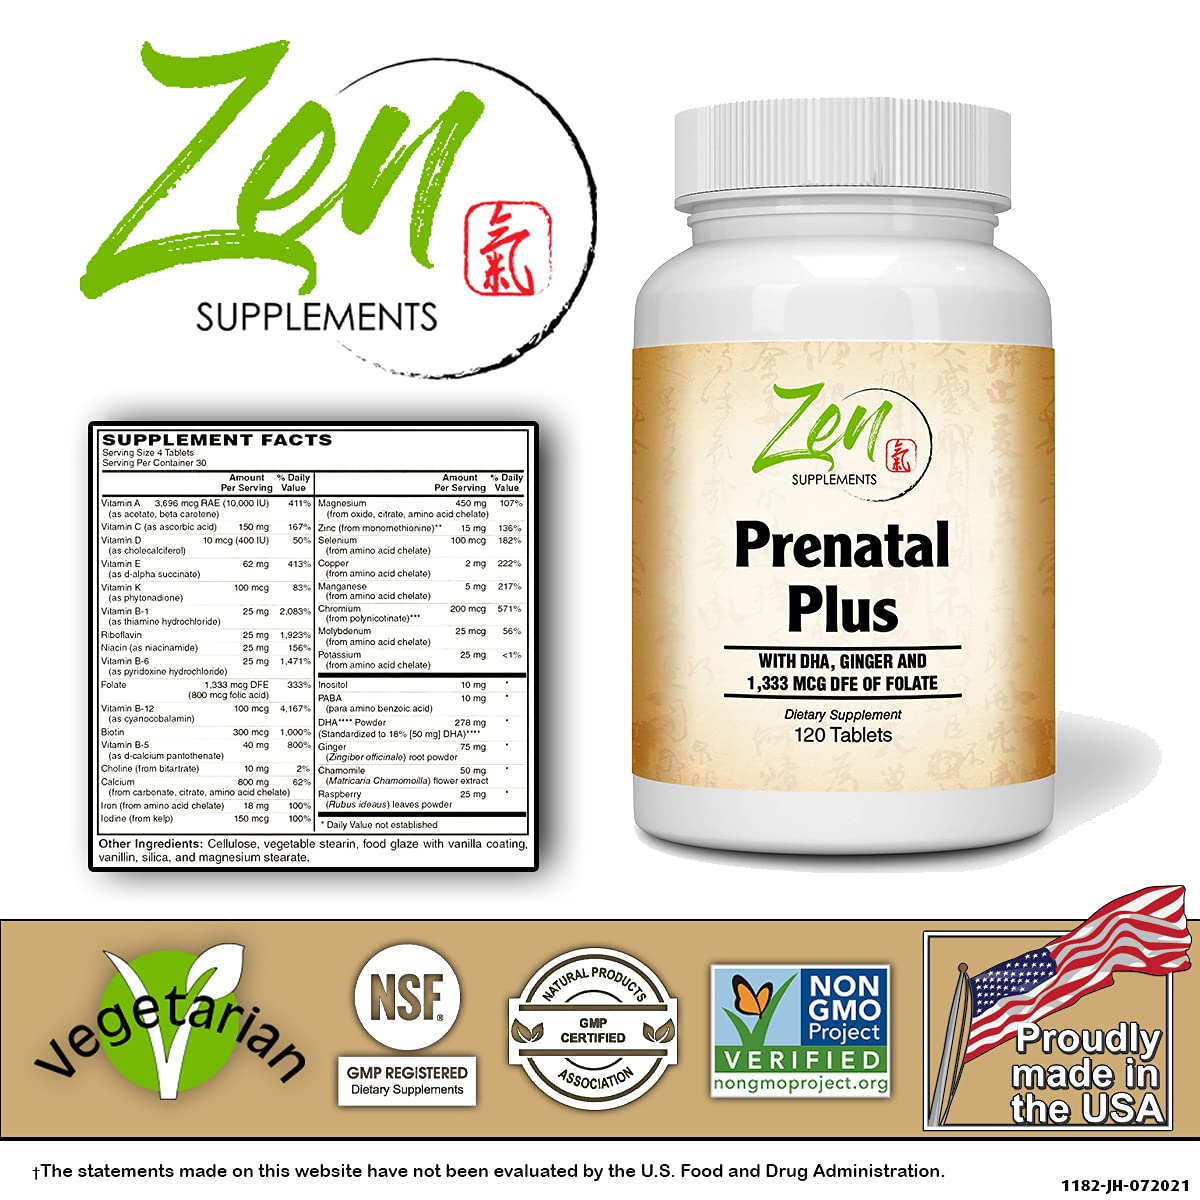 Zen Supplements - Prenatal Plus Multi-Vitamin 120-Tabs - Support for Pregnant & Lactating Women - Non-GMO, Vegetarian, take 4 Tablets Daily, 120 Tablets (30 Day Supply)